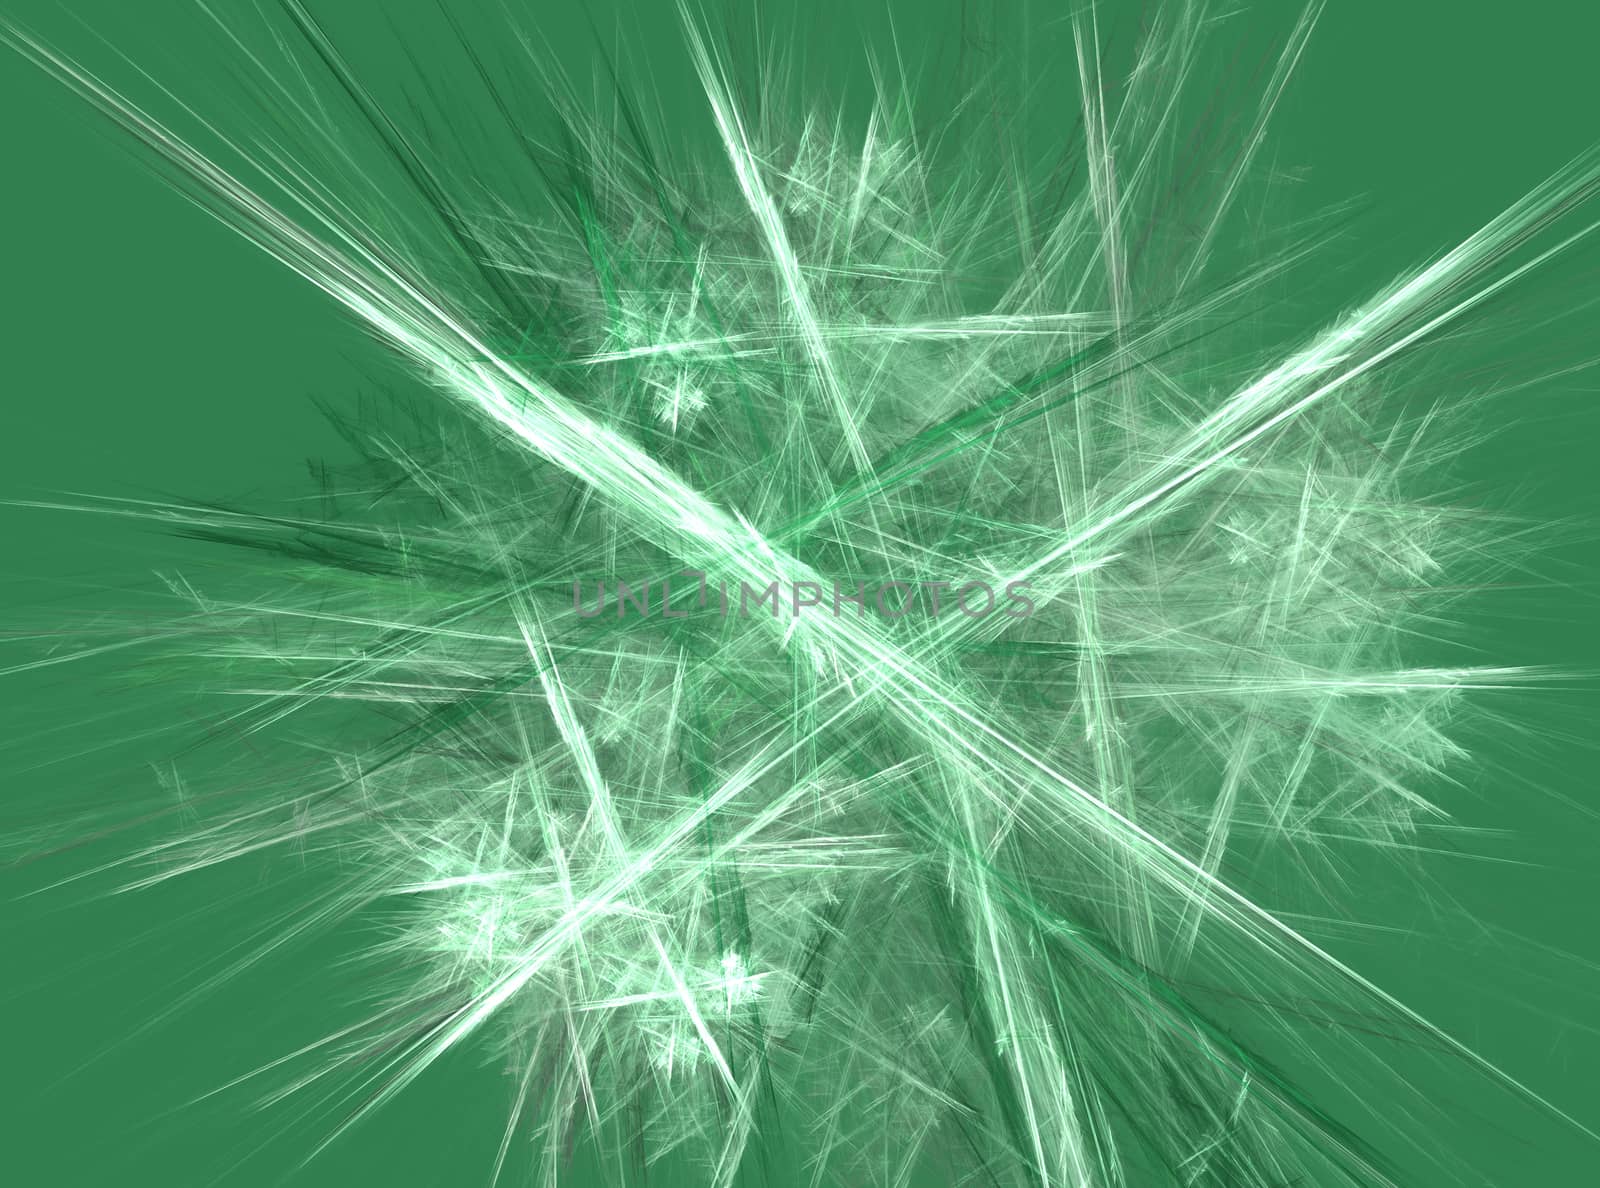 Abstract design made of fractal textures on green background